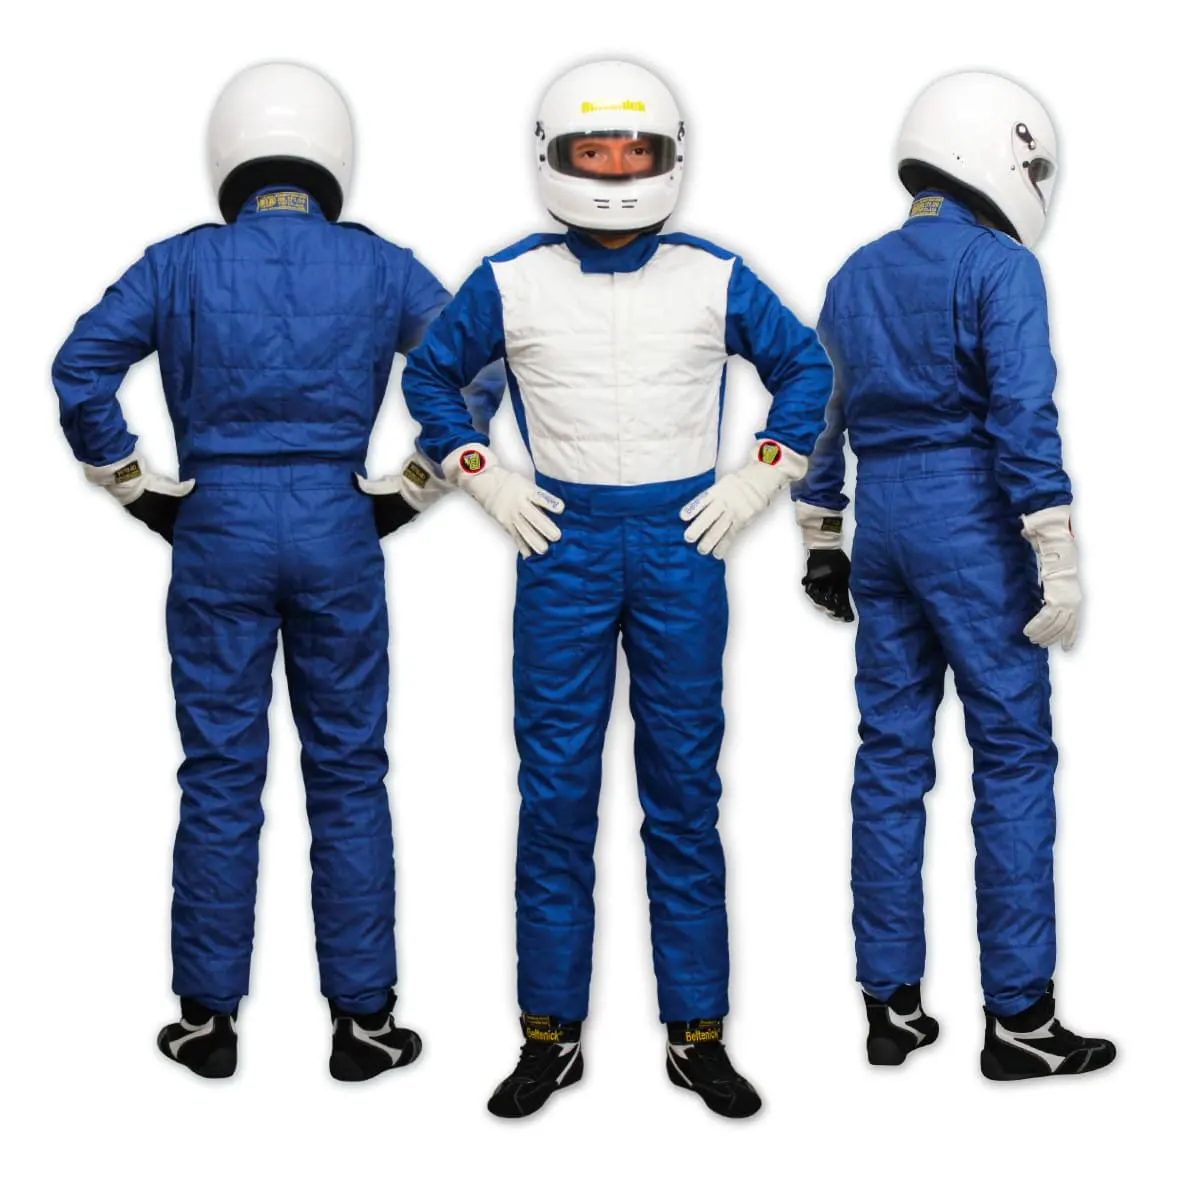 Beltenick FIA Approved 3 Layer Custom FR/Fire Resistant 100% Nomex Car Racing Suit For Car Racing Auto Sports RSN-500